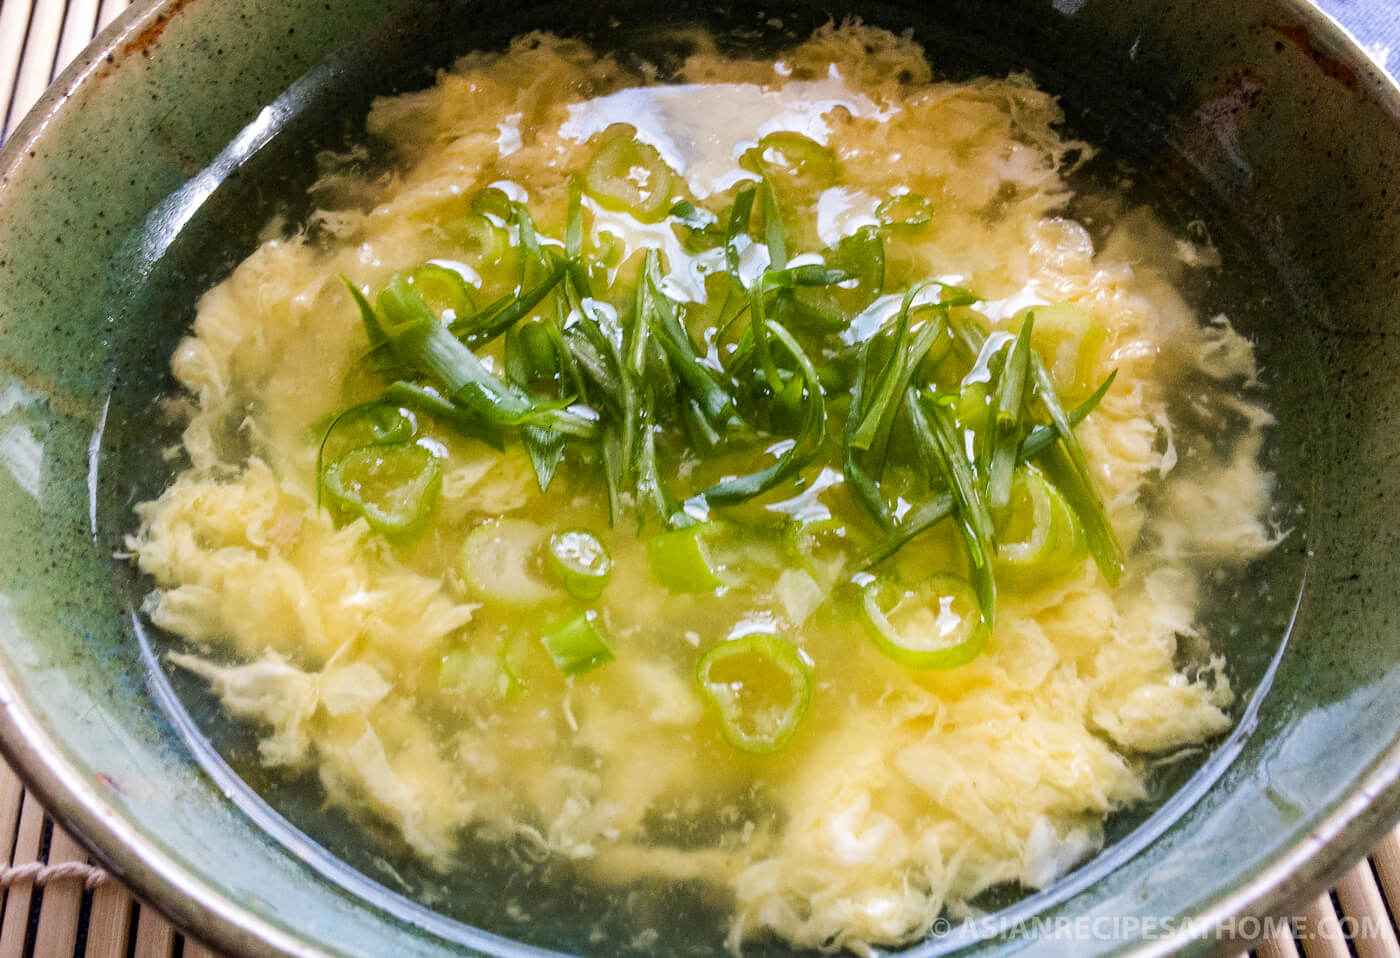 Make this easy homemade egg drop soup with just a few simple ingredients. This egg drop soup recipe is so delicious, easy to make and delivers on great flavor.